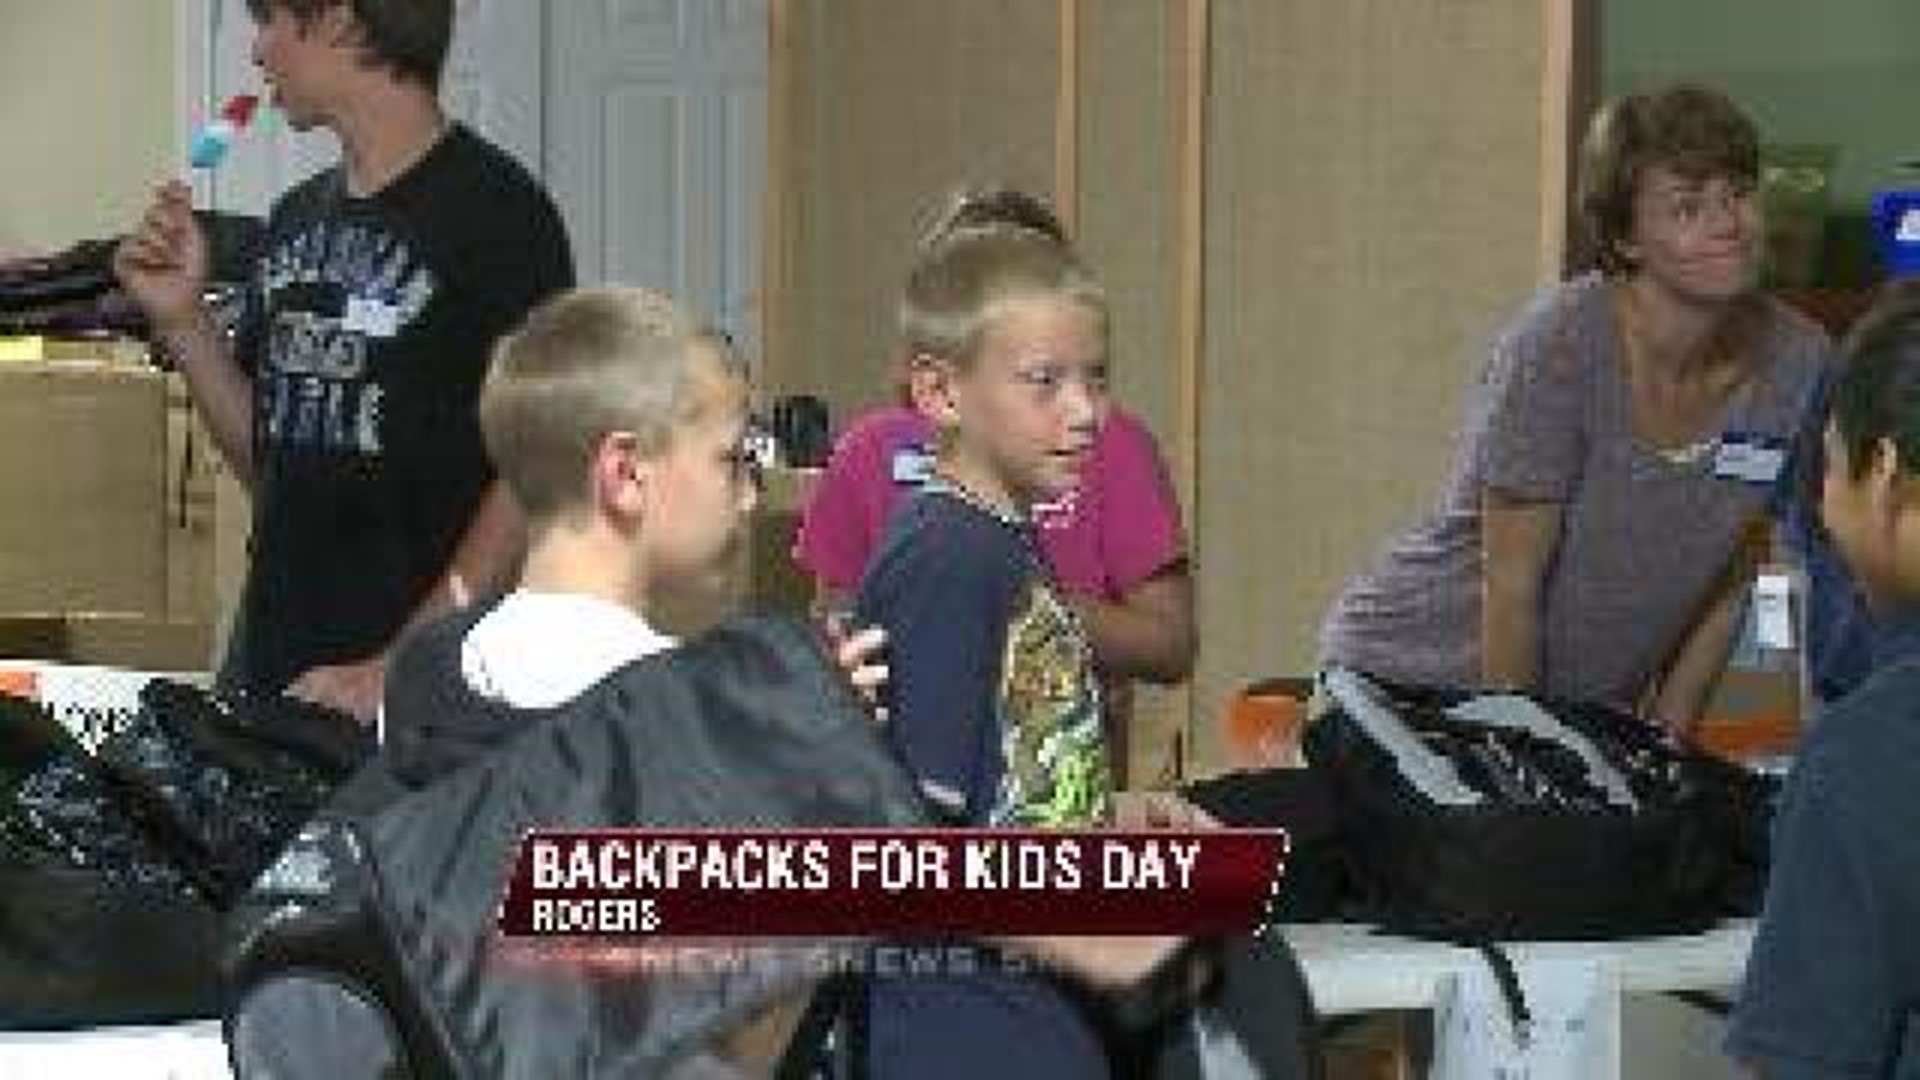 More than 3,000 kids received free backpacks in Northwest Arkansas